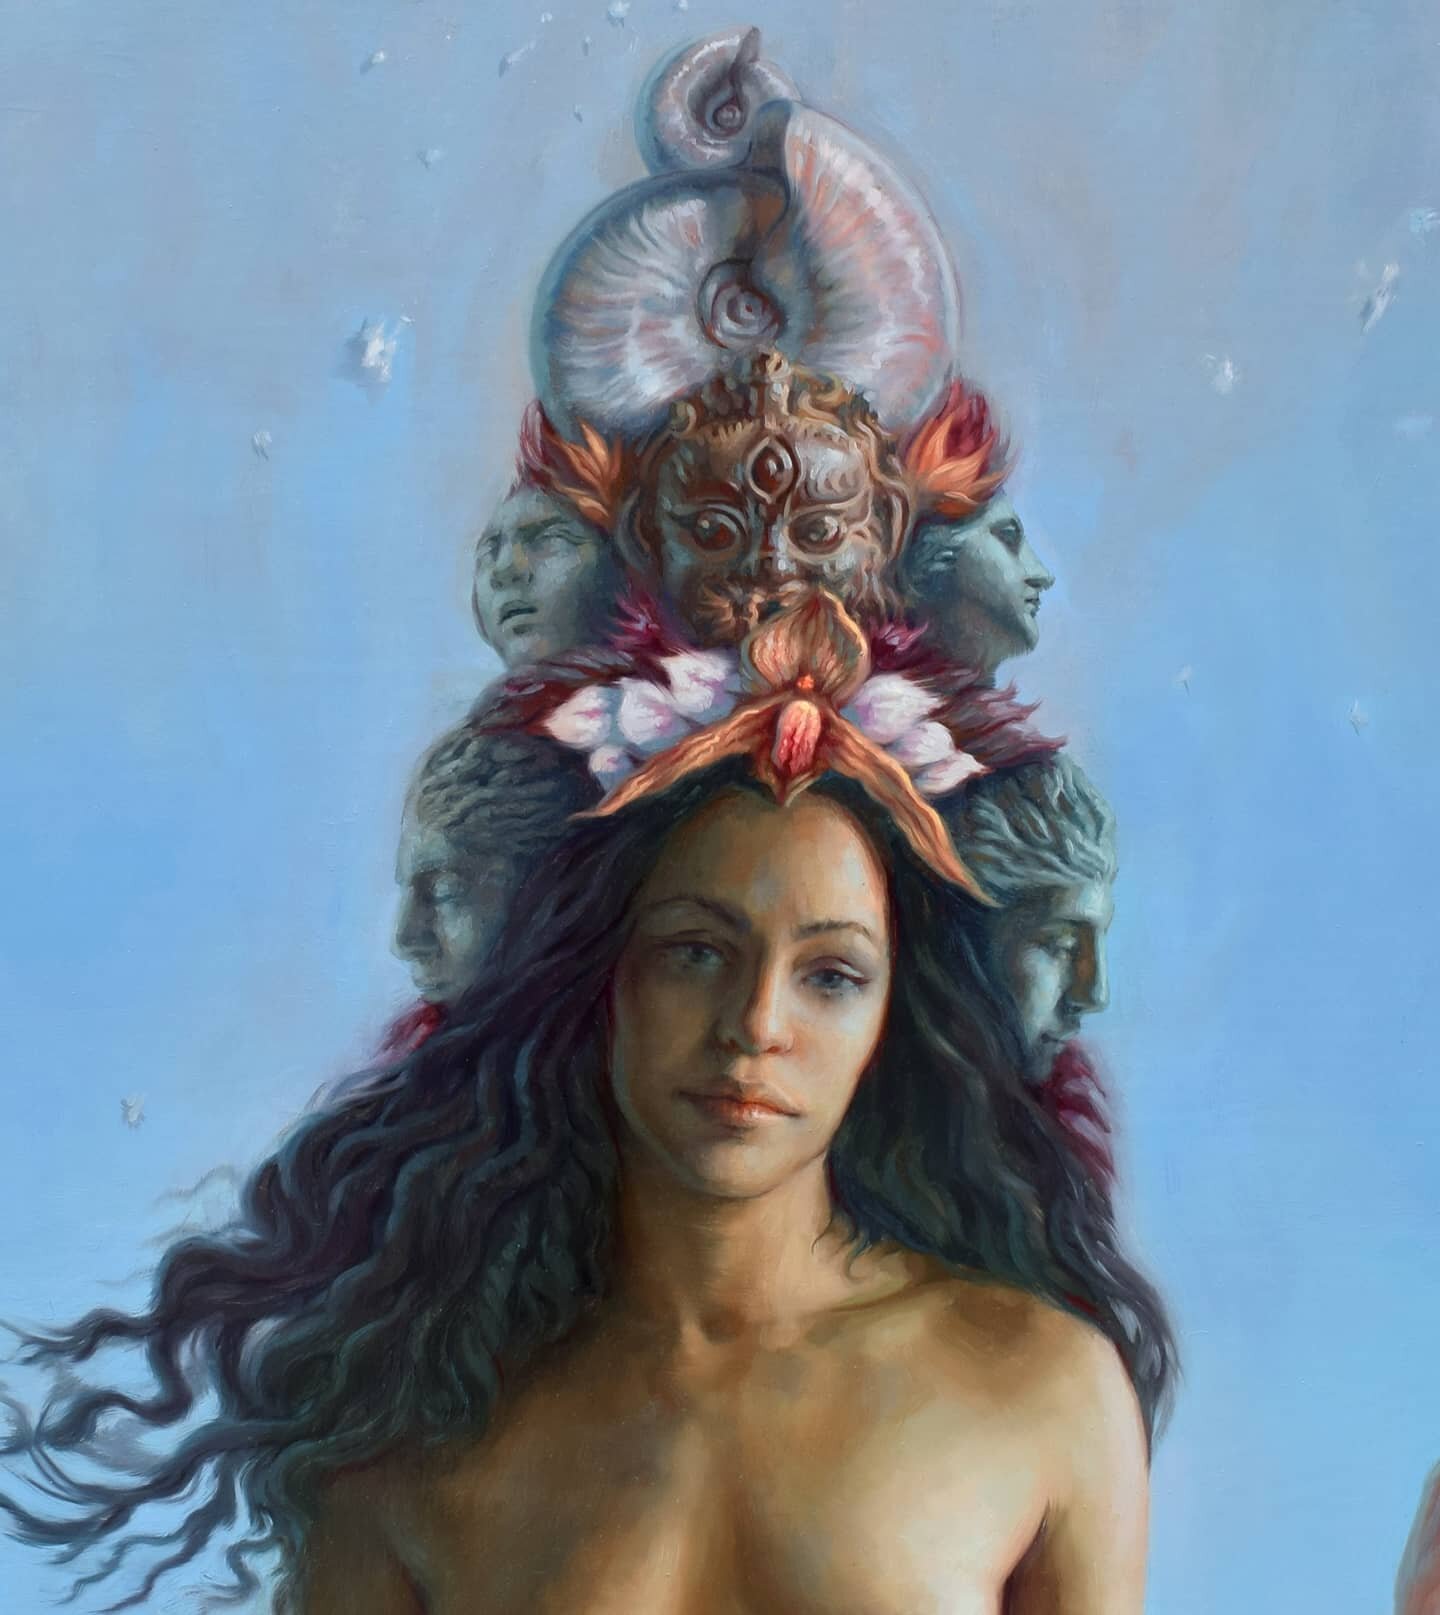 Some detail pics from 'Birth of Venus'. This painting is 84&quot;x118&quot; (about 7x10 ft). Large paintings are usually best viewed from a bit of distance, but this one is best experienced closer up because of all the 'mini worlds' within the painti